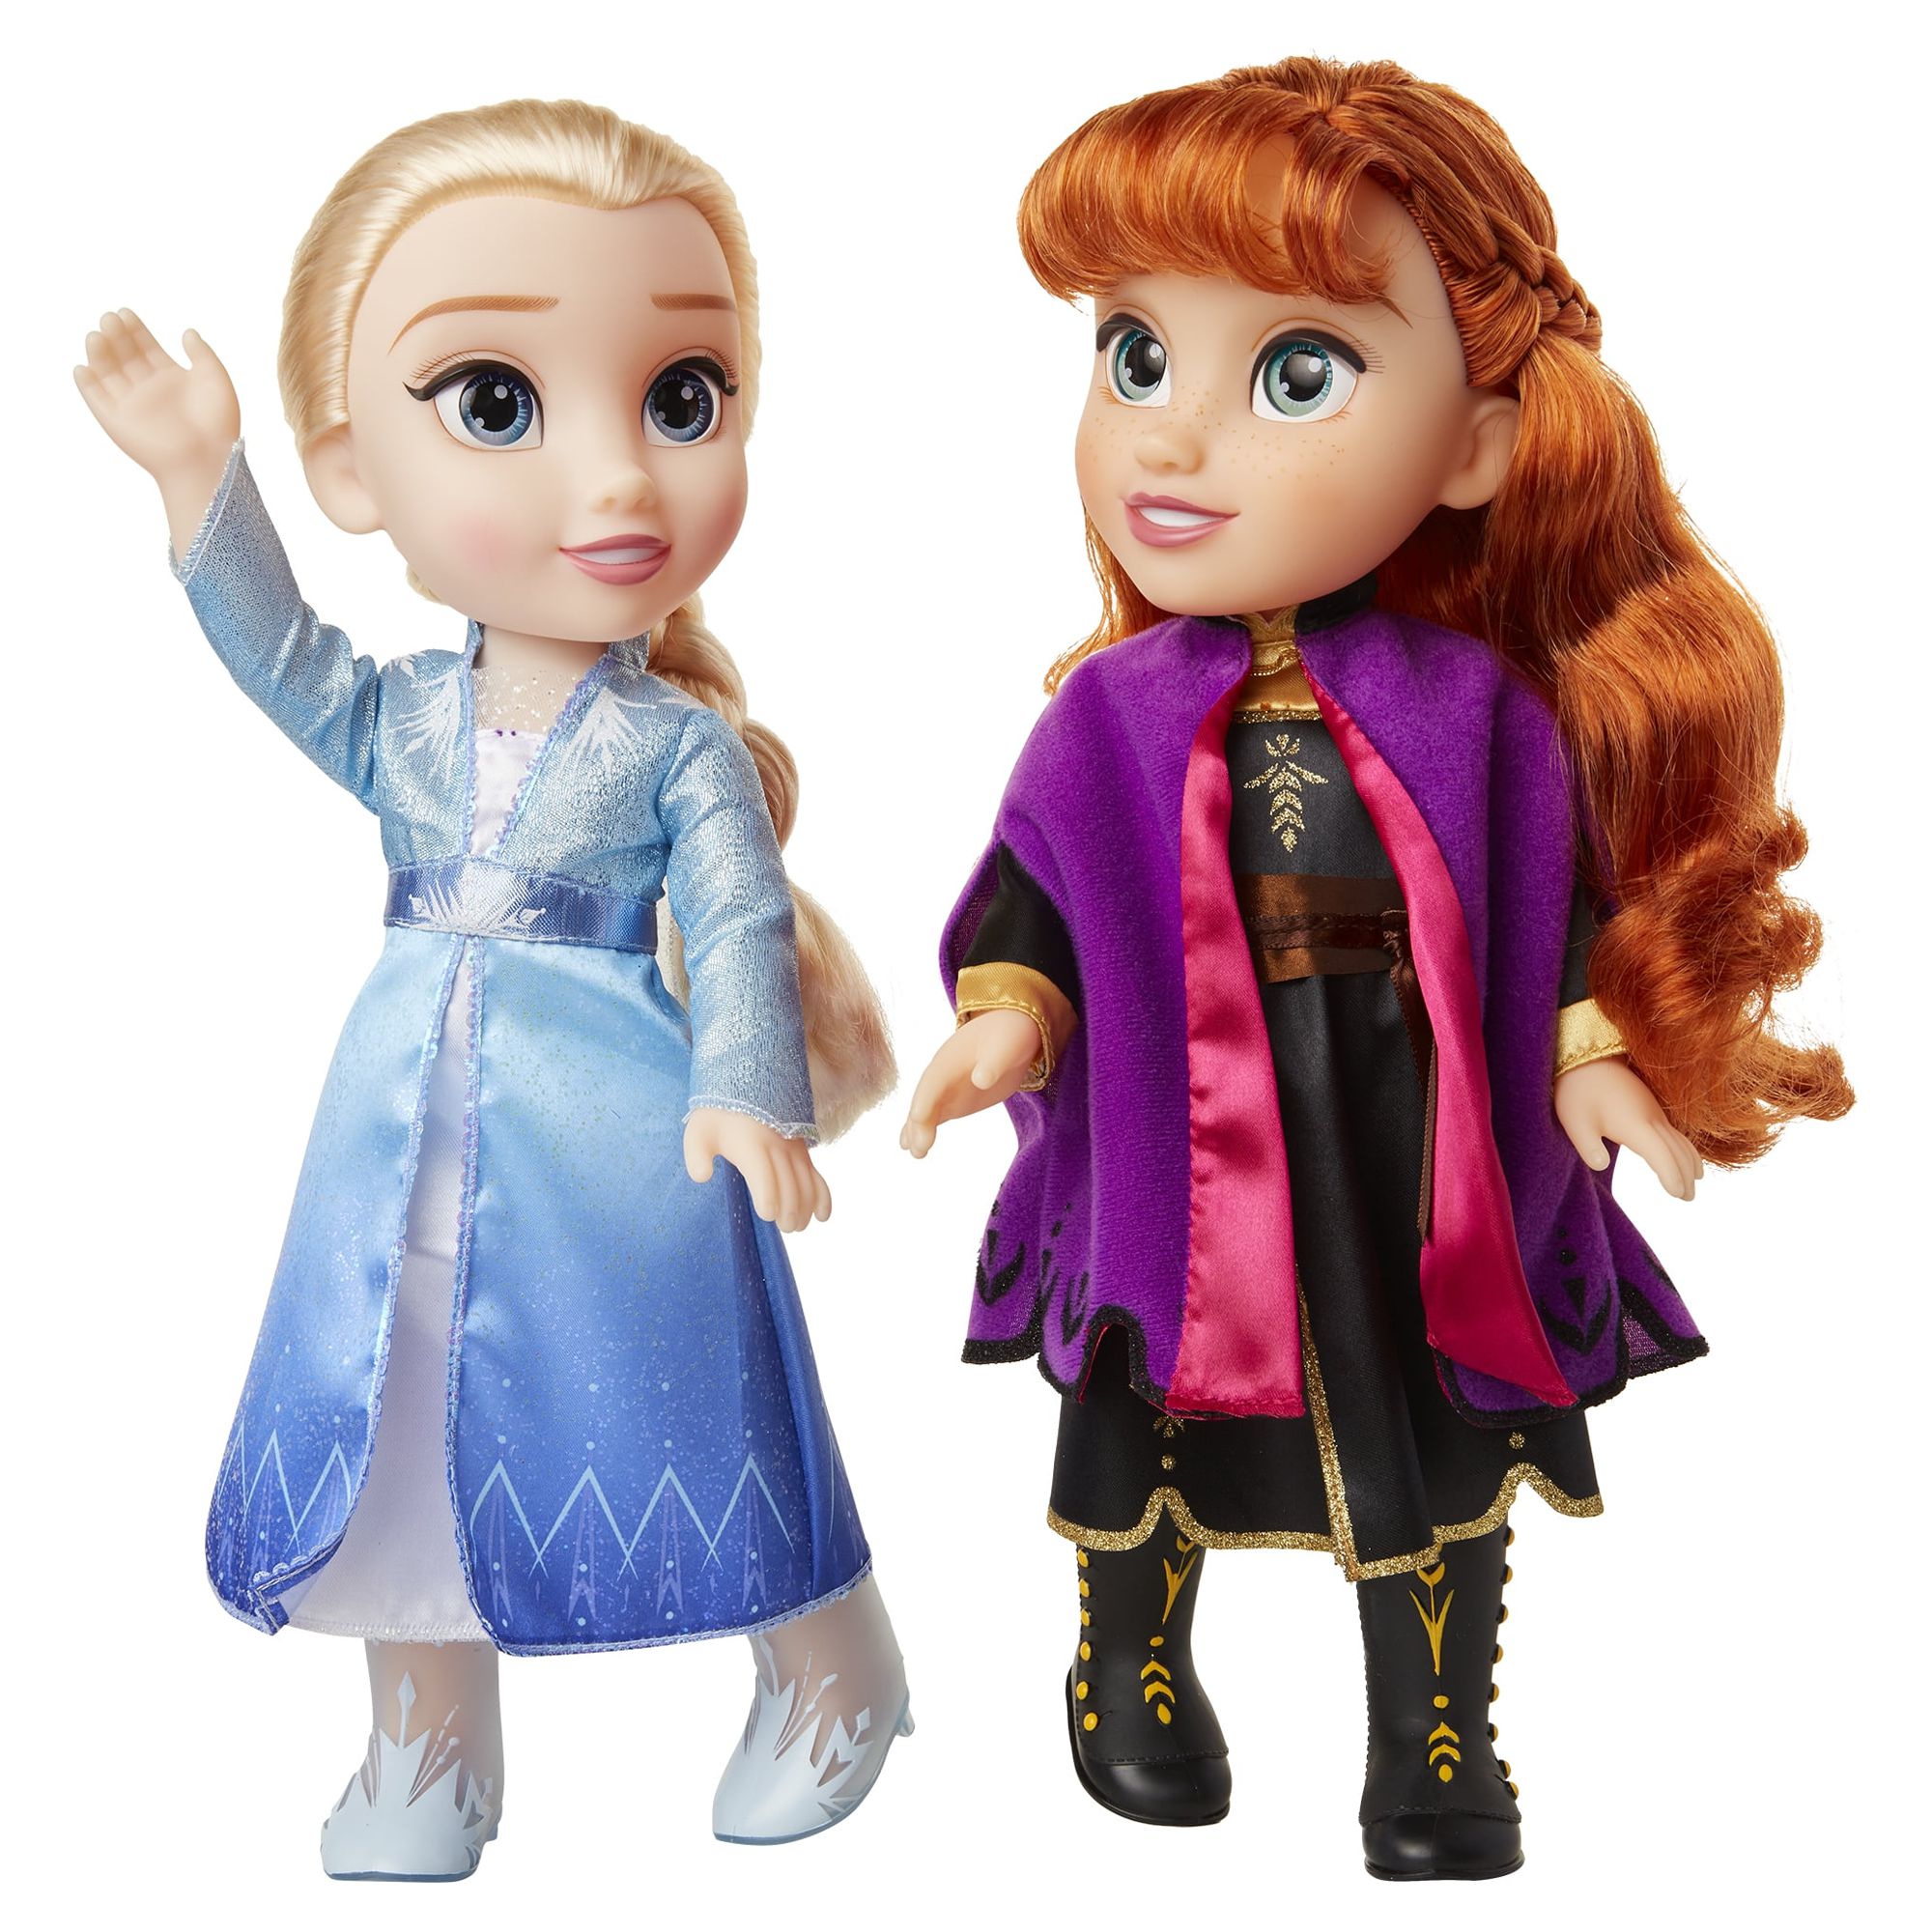 Disney Princess Anna and Elsa 14 Inch Singing Sisters Feature Fashion Doll 2 Pack - image 3 of 12